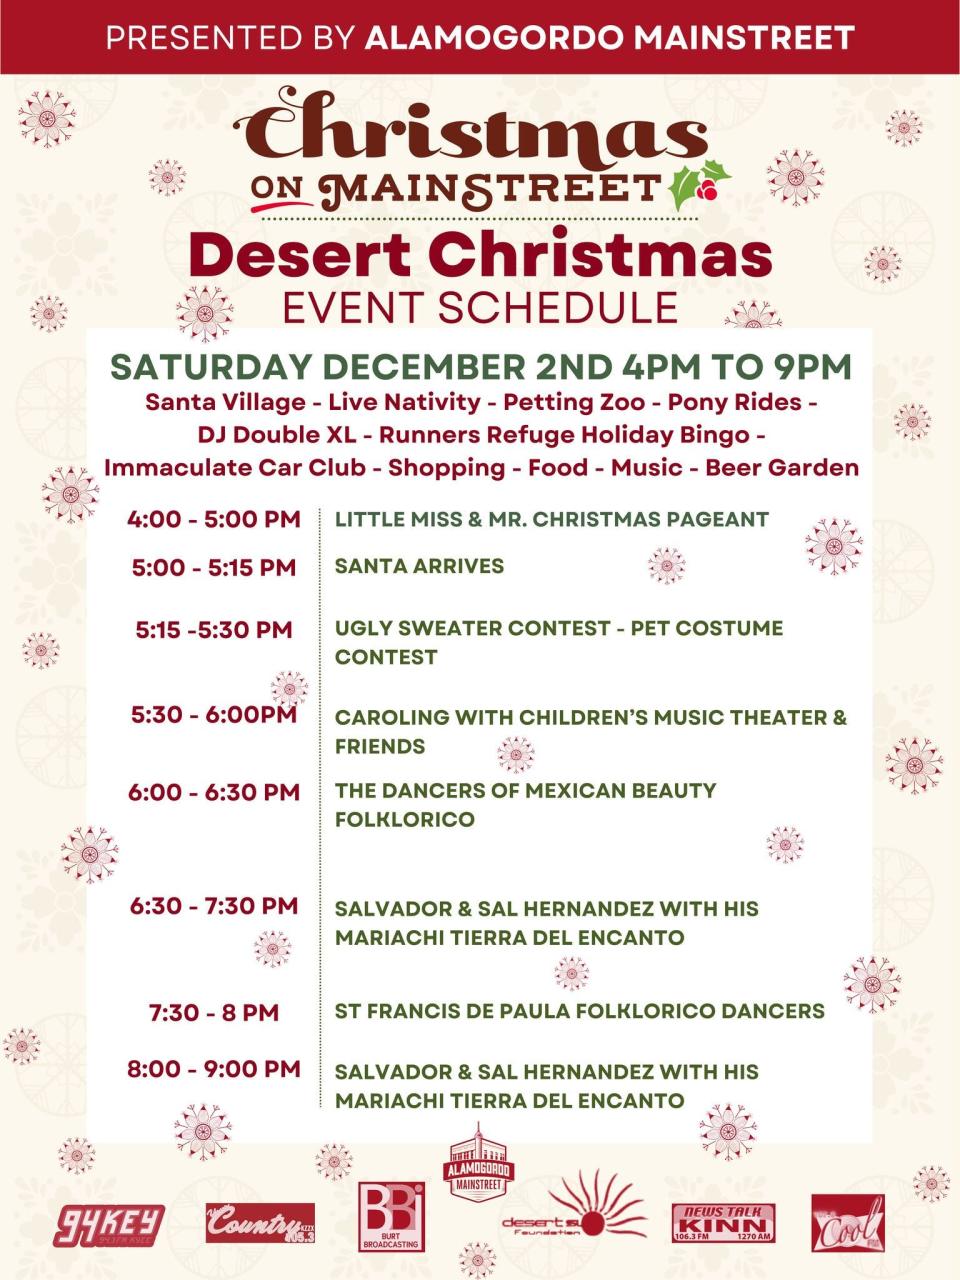 The following is the schedule for the Christmas on MainStreet event from 4 p.m. to 9 p.m. on Dec. 2.